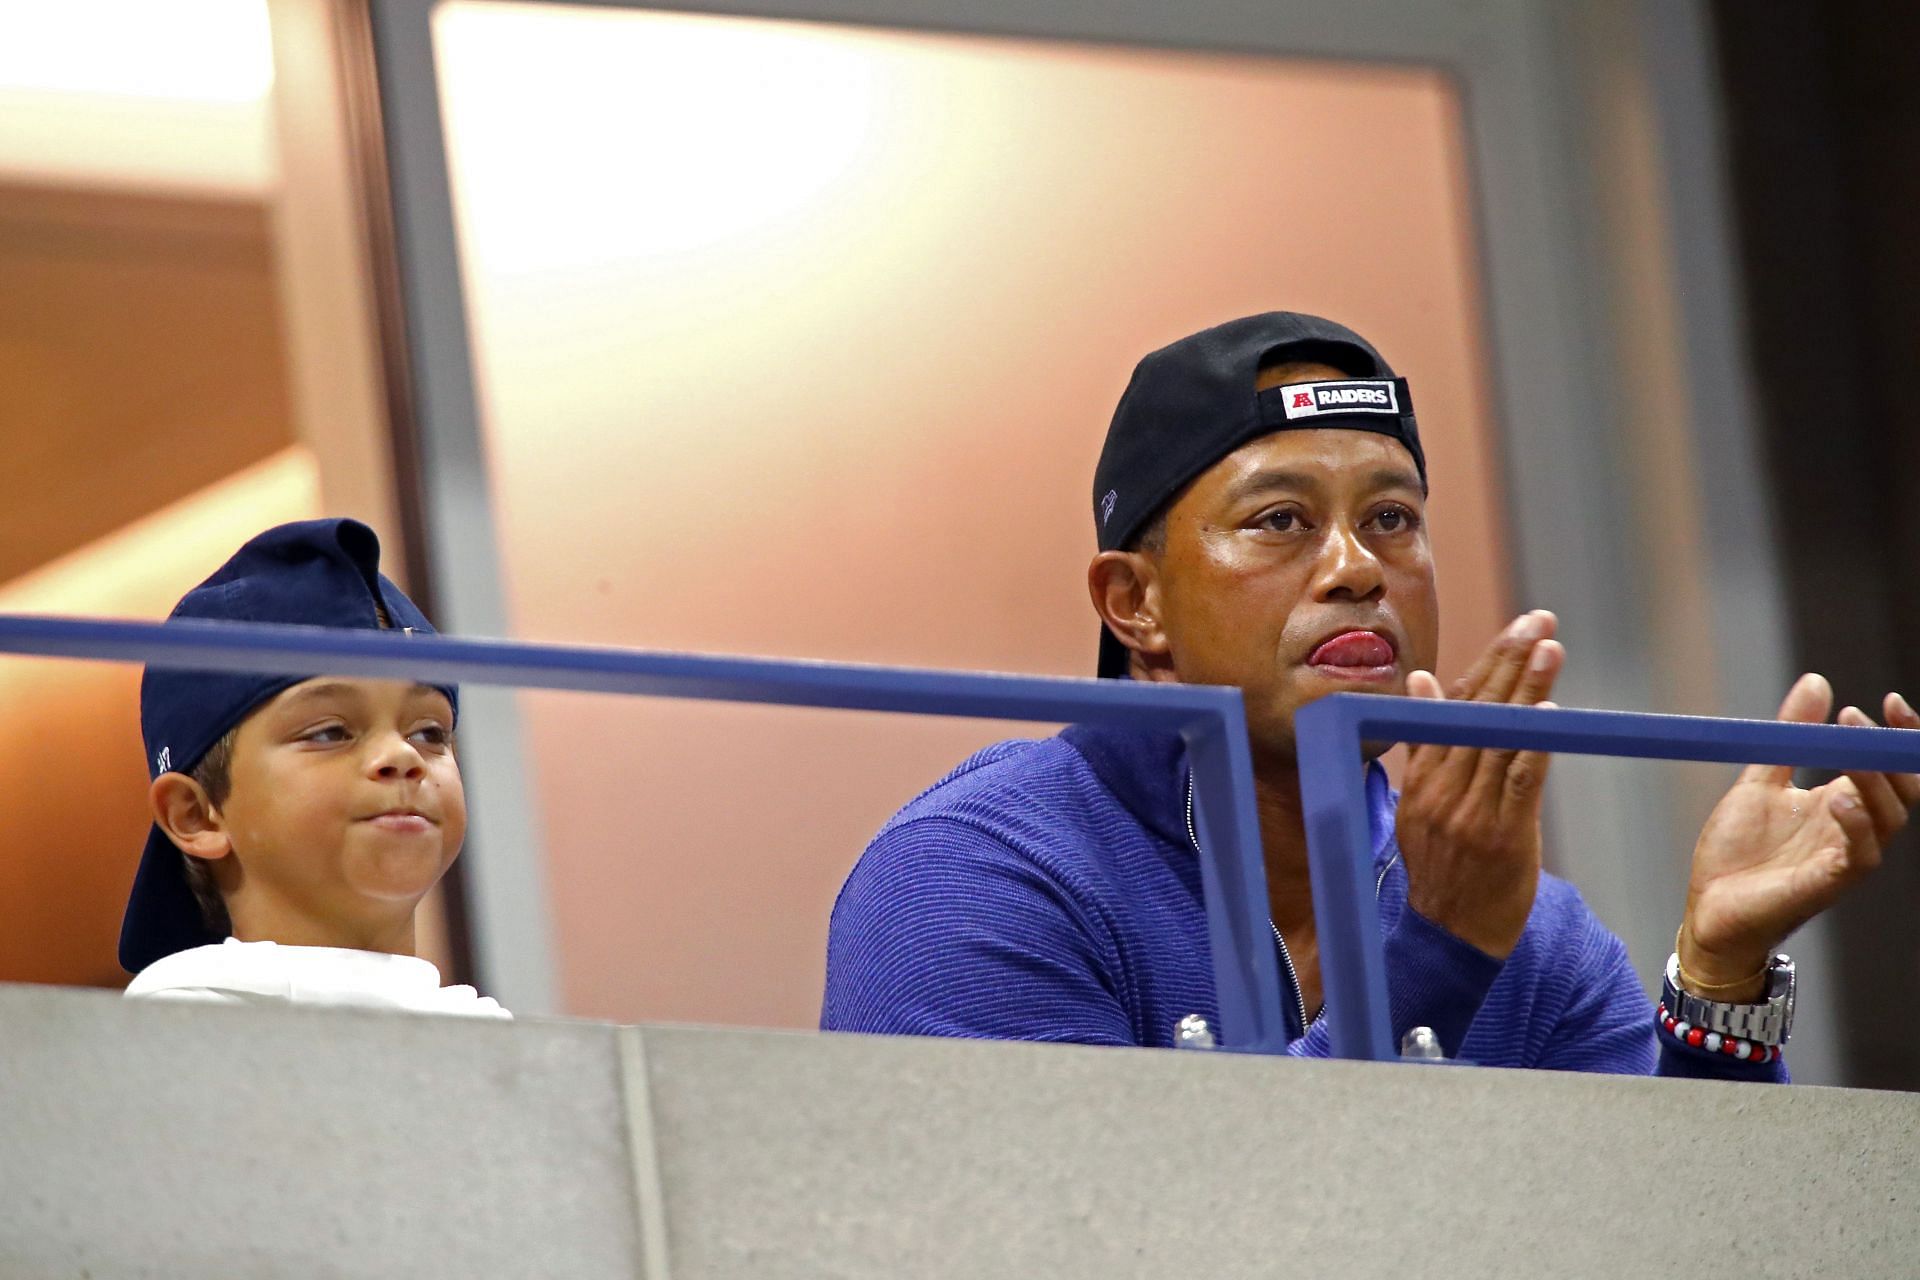 Tiger Woods watching Rafael Nadal in action at the 2019 US Open